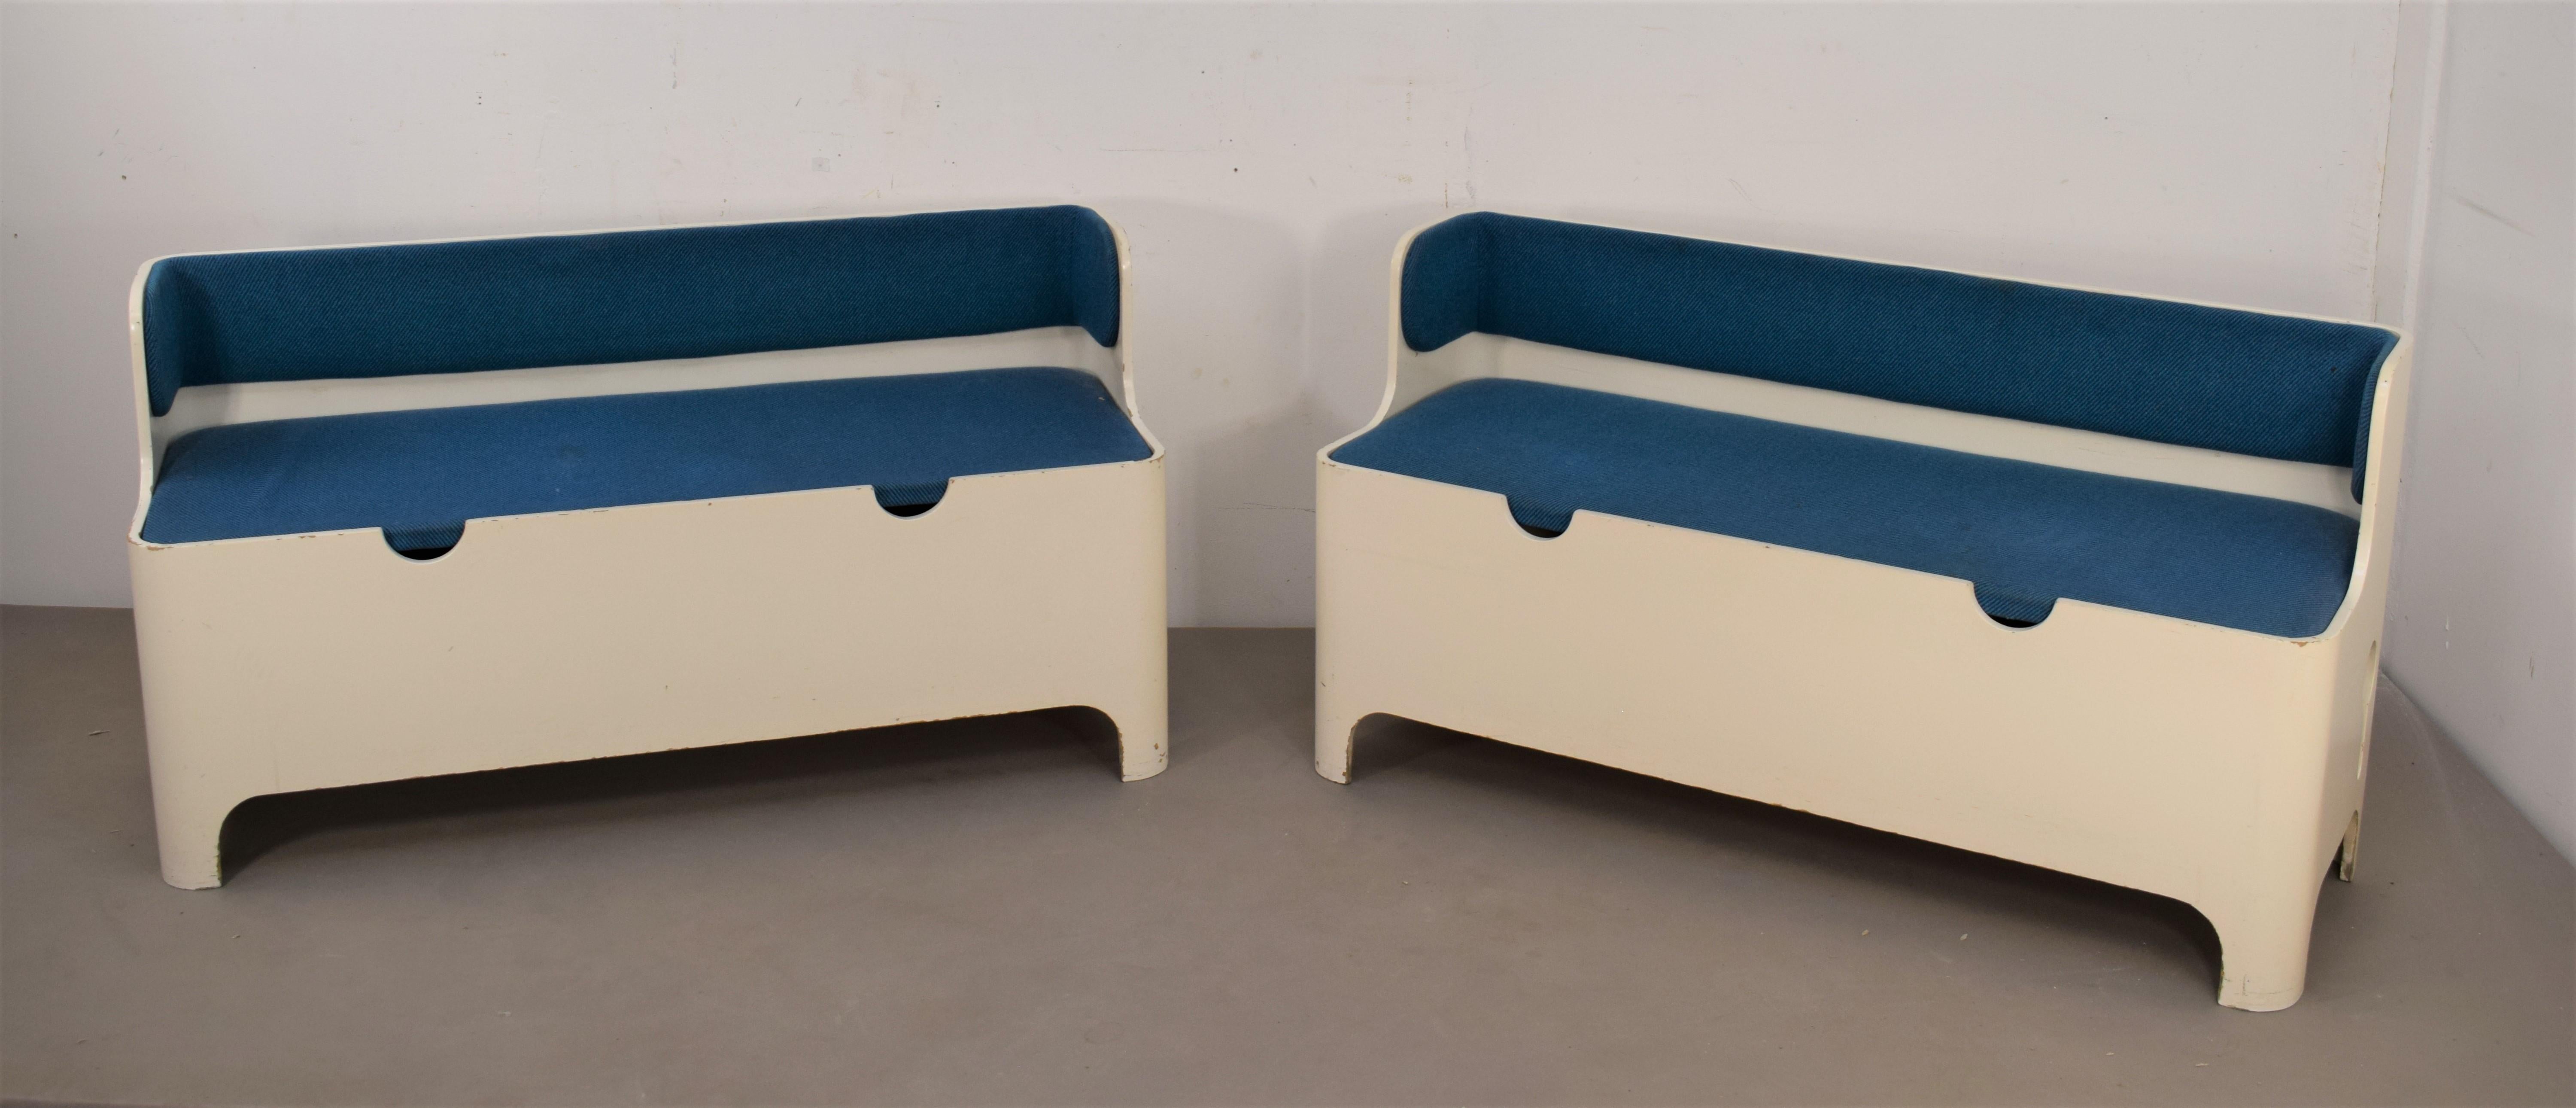 Mid-Century Modern Carlo De Carli for Fiarm, Pair of Benches, 1960s